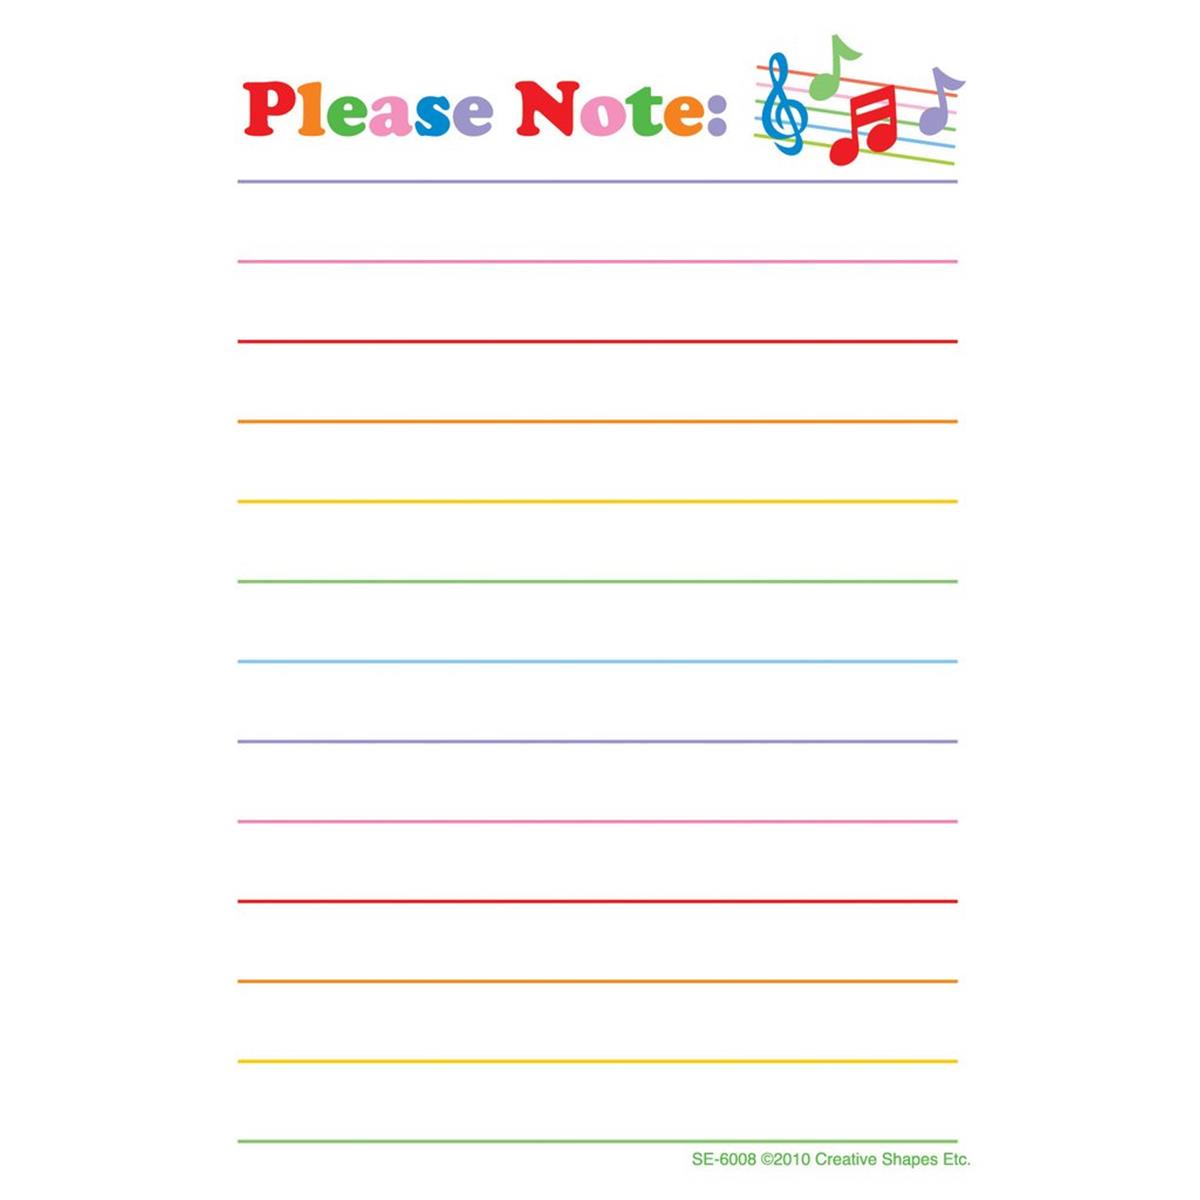 Se-6008 3.5 X 5 In. Notes & Quotes, Please Finish - 35 Sheets Per Pack